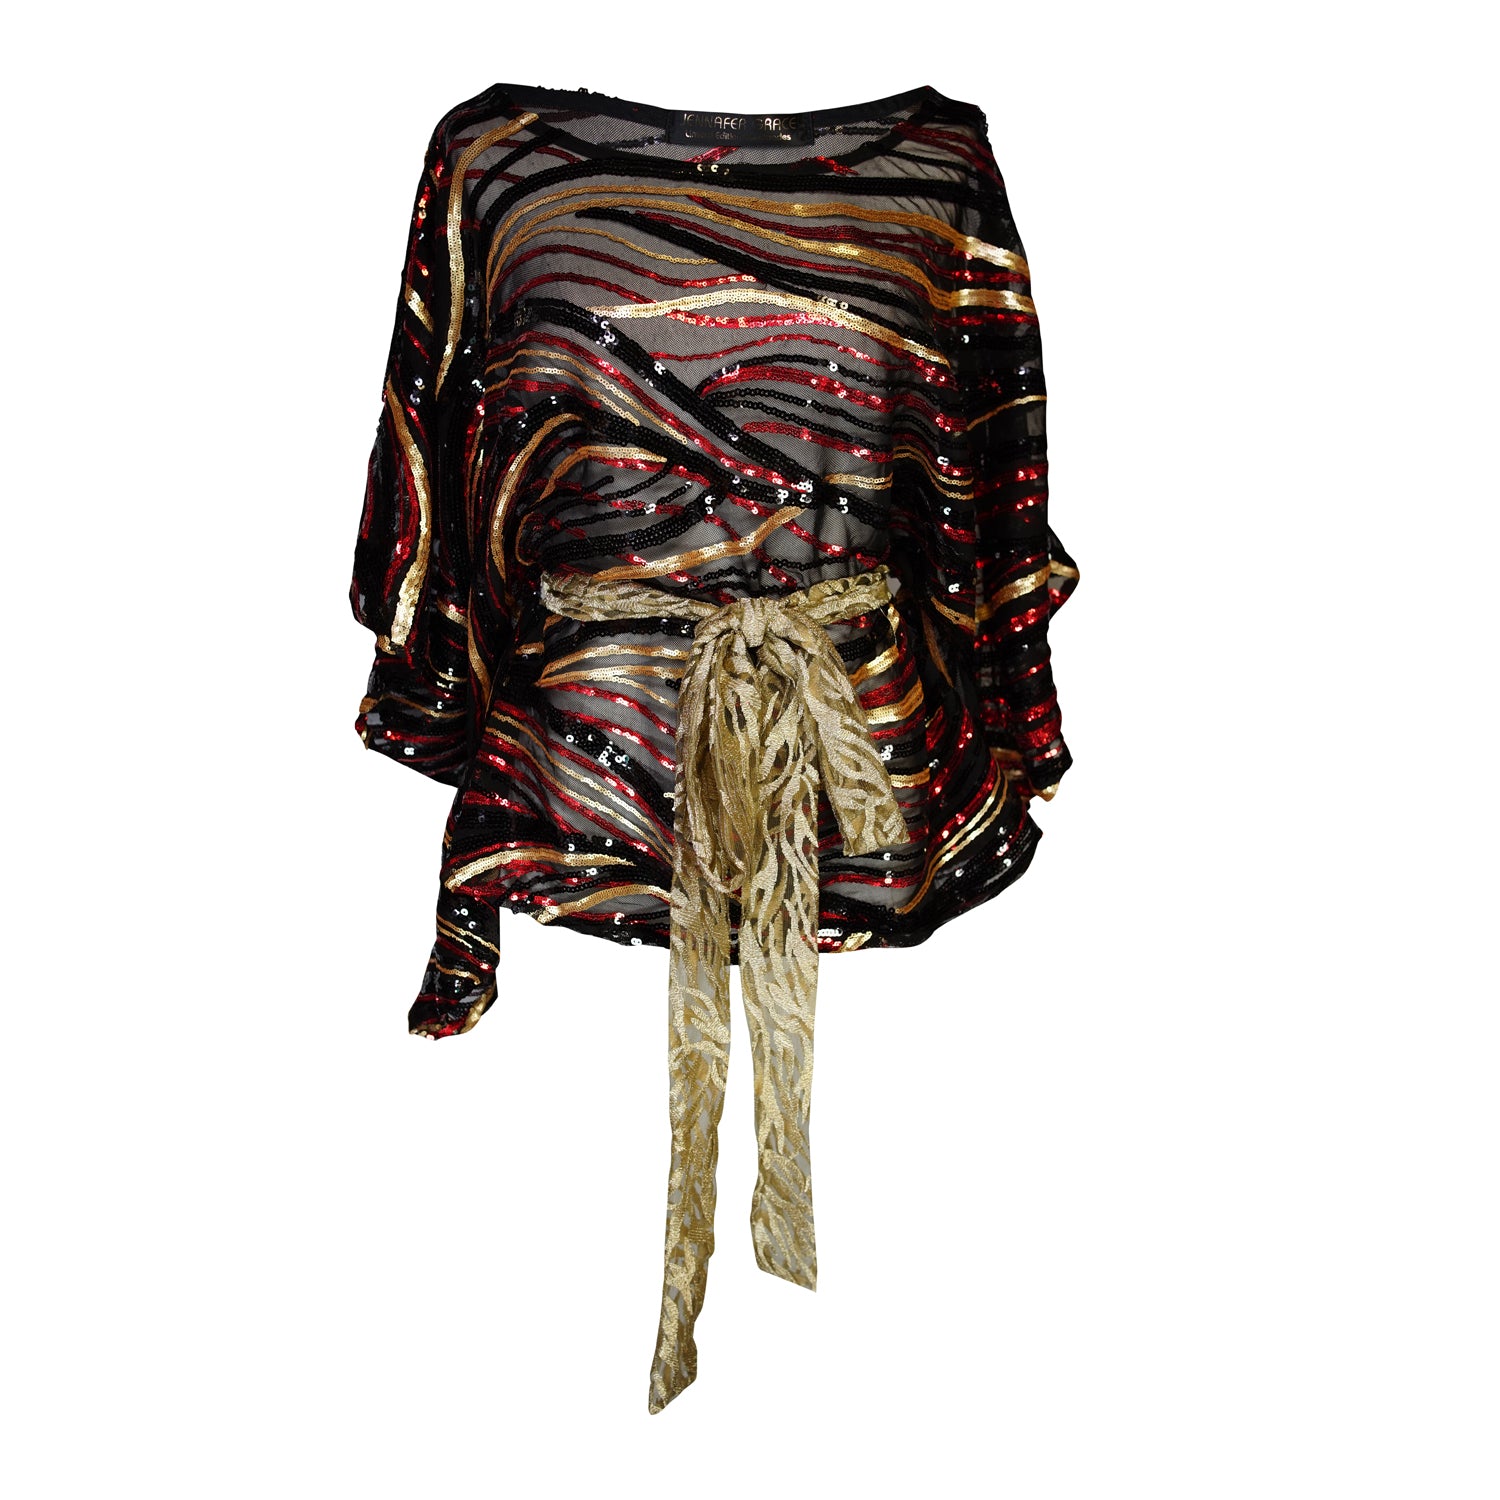 Jennafer Grace Imperial Disco Poncho sequined mesh scarf top with gold sequin tie belt festive Chinese lunar new year themed semi-sheer blouse with gold red black sequin abstract tiger stripes boho bohemian hippie romantic whimsical unisex handmade in California USA